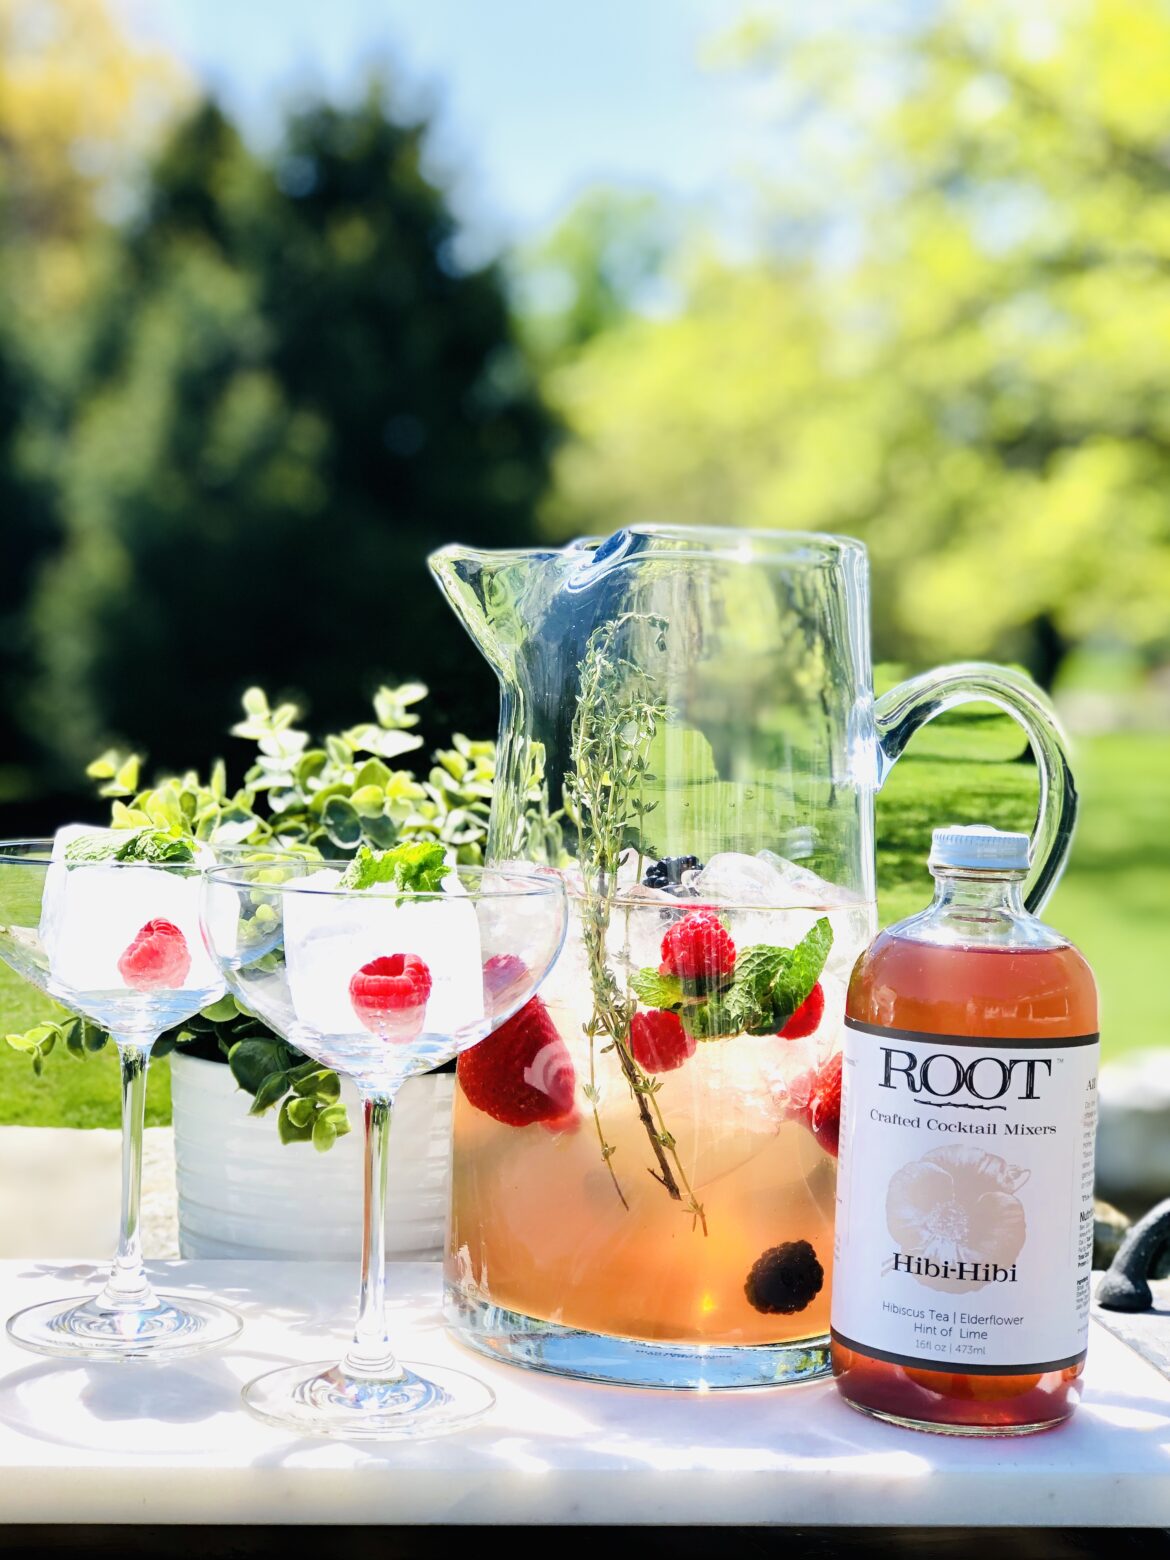 Memorial Day Picture Root Crafted Cocktail Mixers